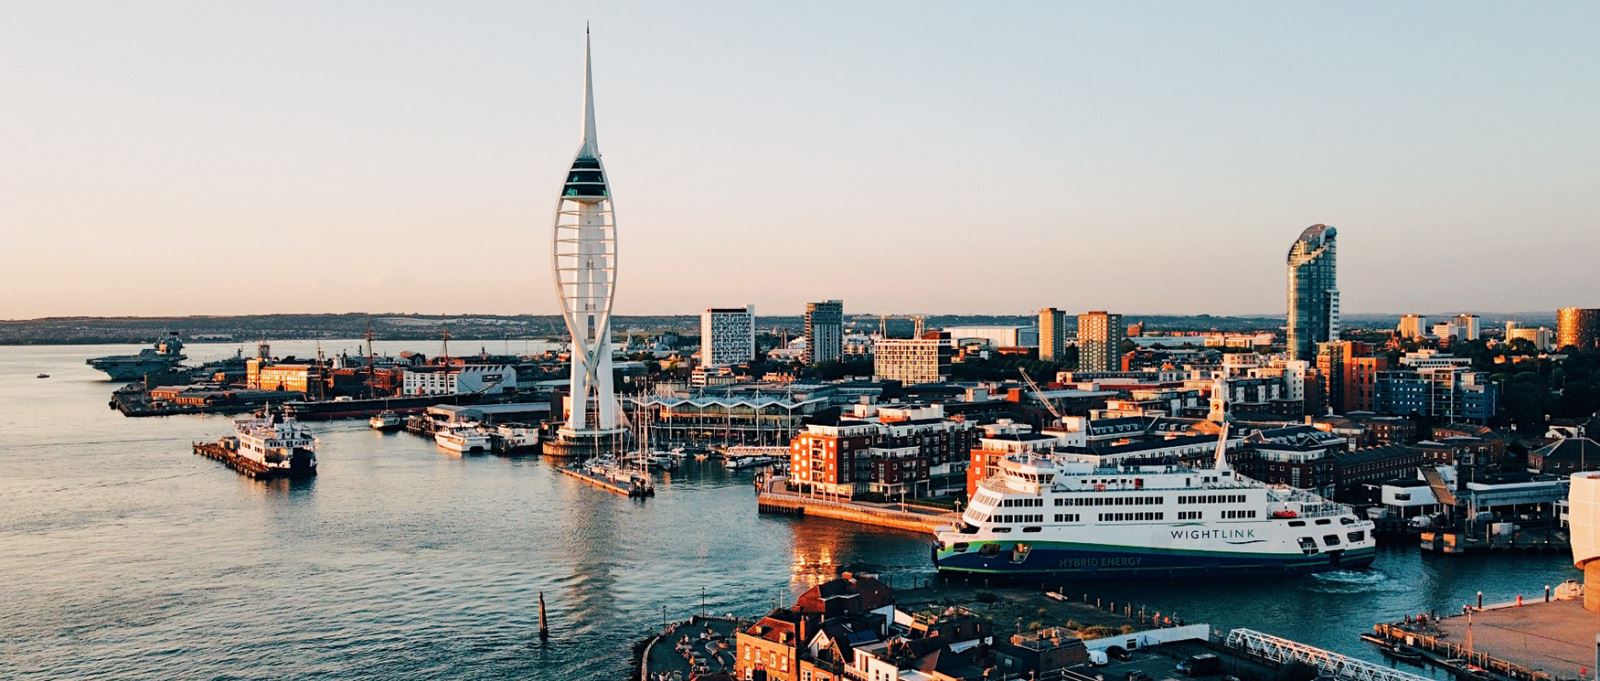 Spinnaker Tower, Portsmouth, Hampshire